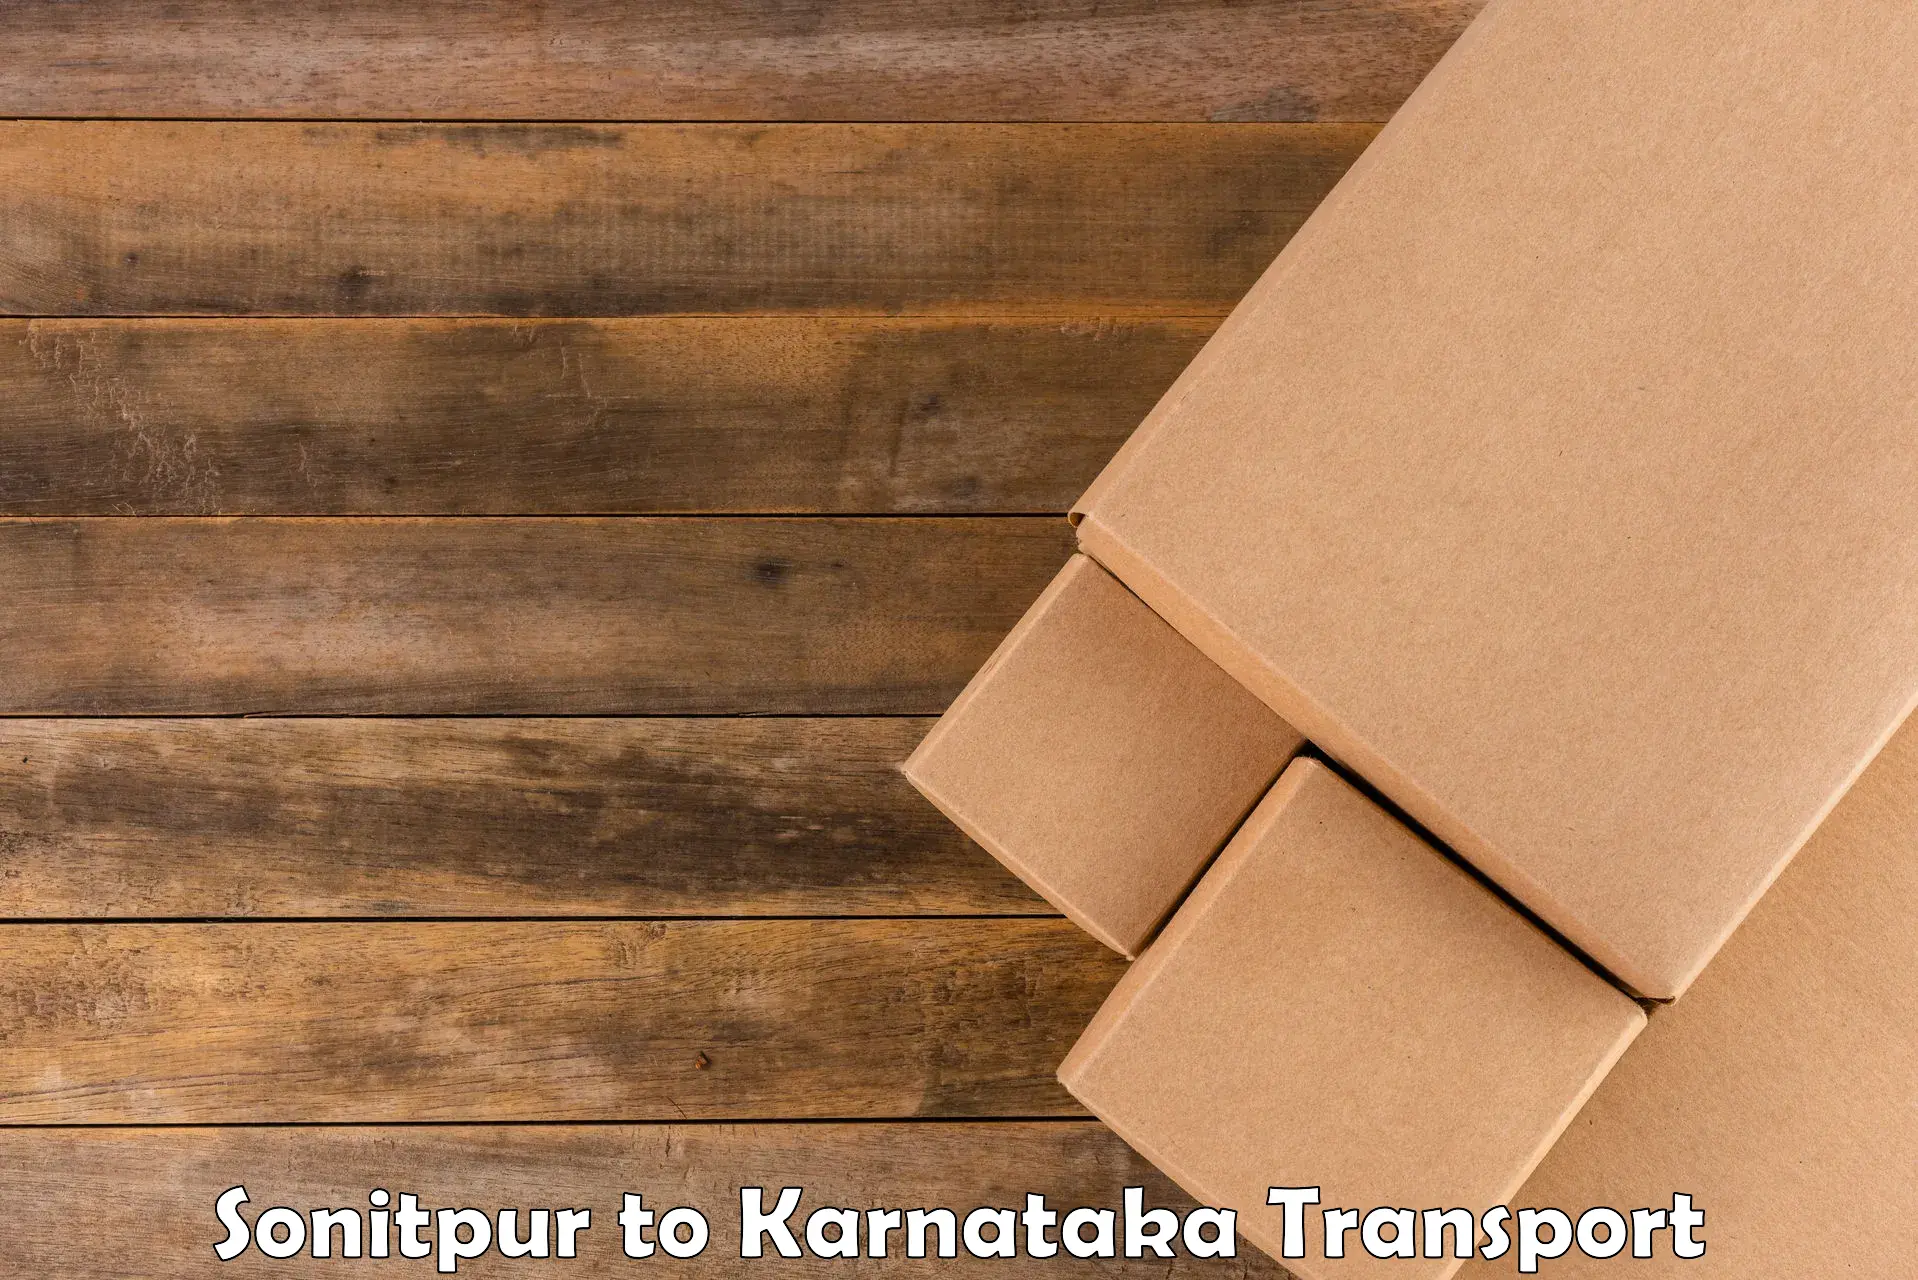 Pick up transport service Sonitpur to Eedu